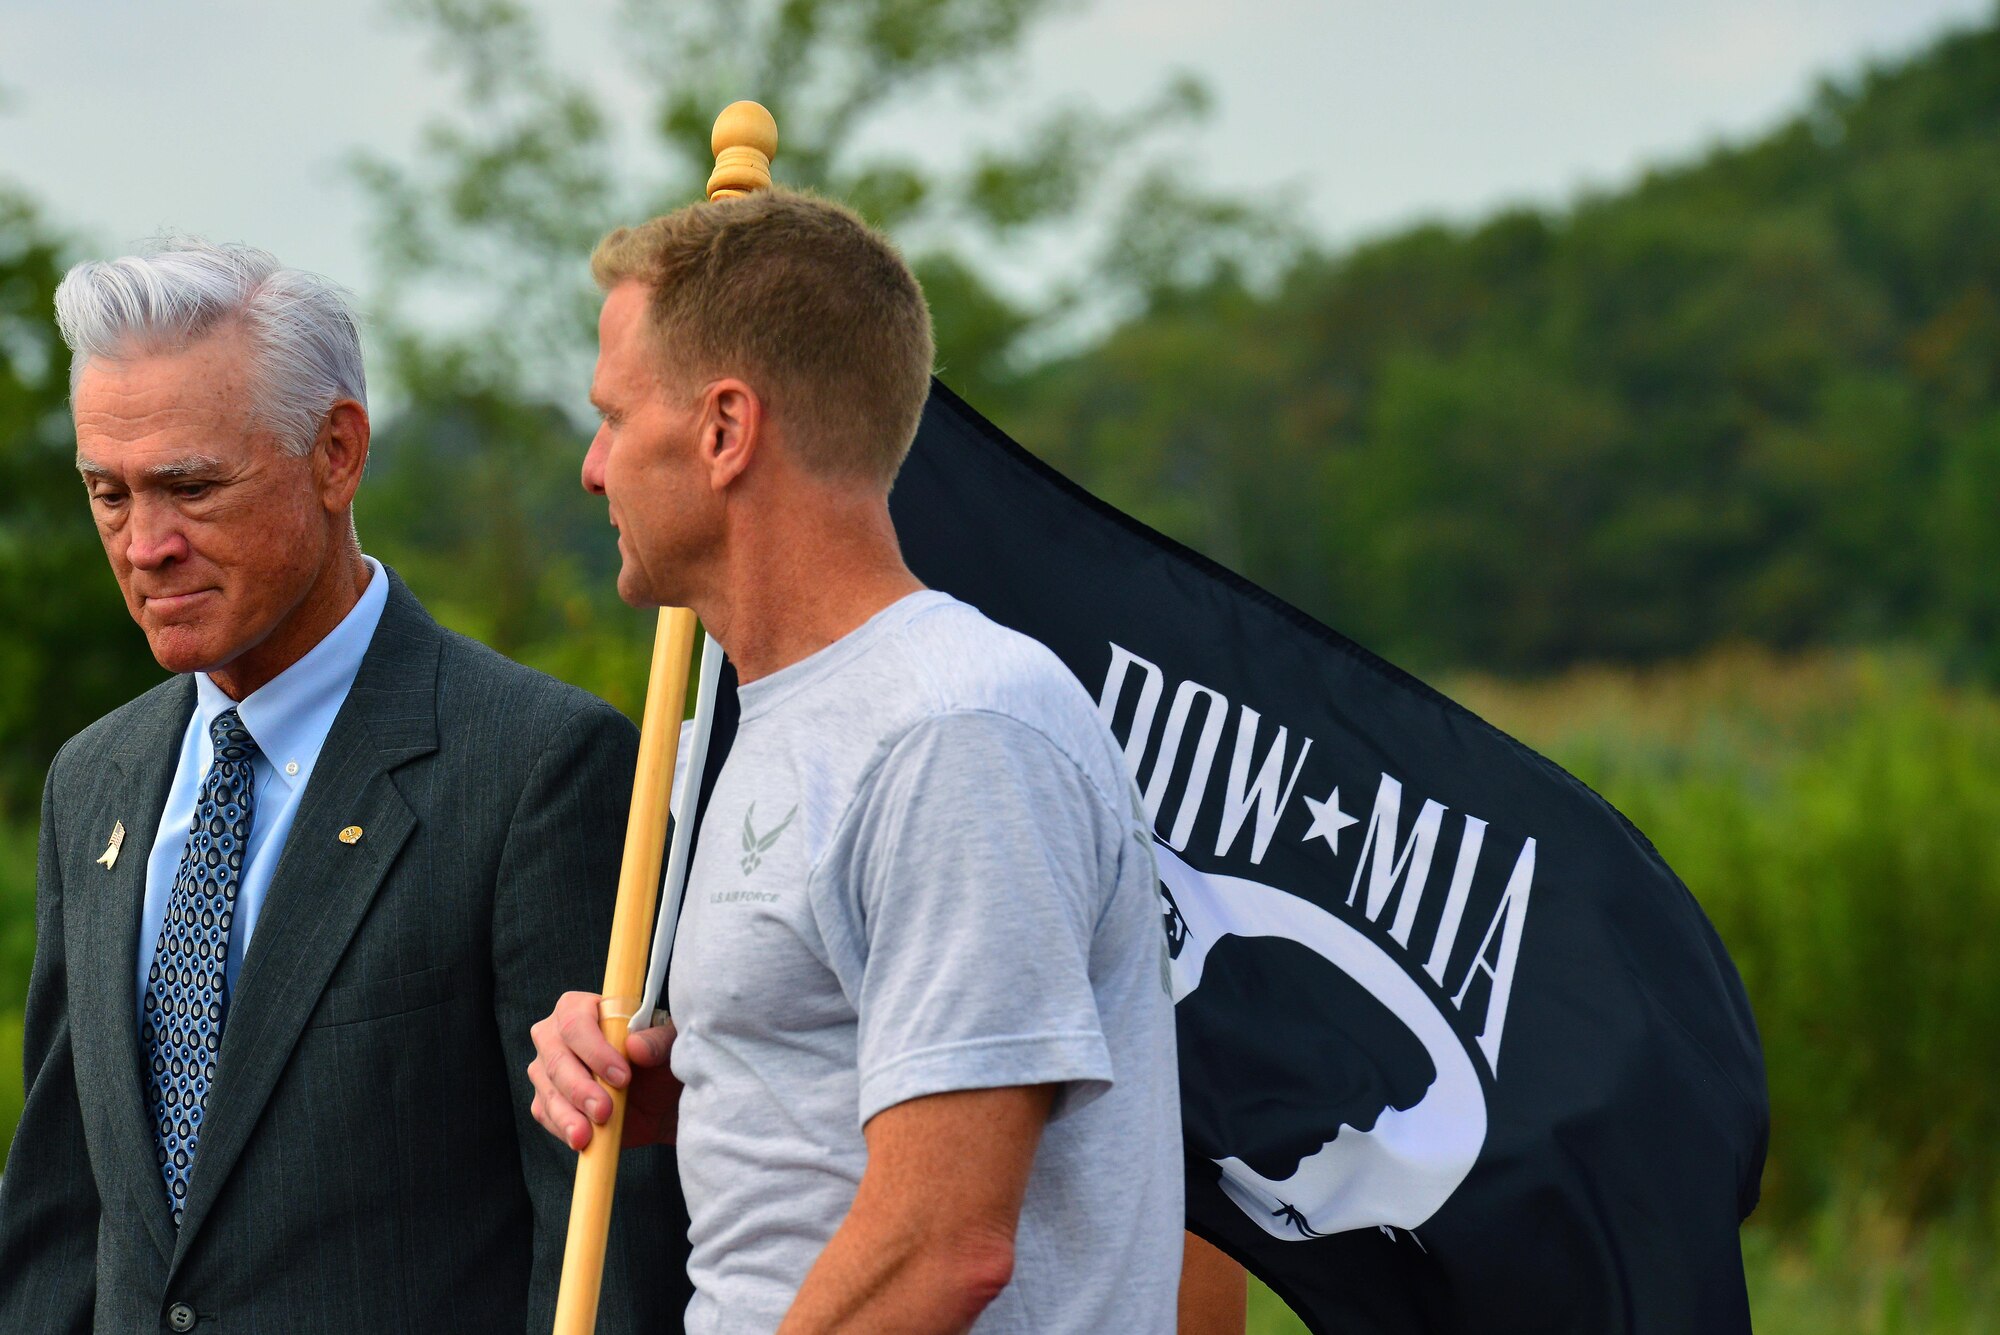 U.S. Air Force Col. Donald Borchelt, 1st Fighter Wing vice commander, and U.S. Air Force retired Lt. Col. Barry Bridger, begin the 24-hour run to honor all prisoners of war and service members missing in action during the National POW/MIA Recognition Day ceremony at Joint Base Langley-Eustis, Va., Sept. 15, 2016. Bridger was a prisoner of war in “Hanoi Hilton” prison camp for six years during the Vietnam War. (U.S. Air Force photo by Airman 1st Class Tristan Biese)